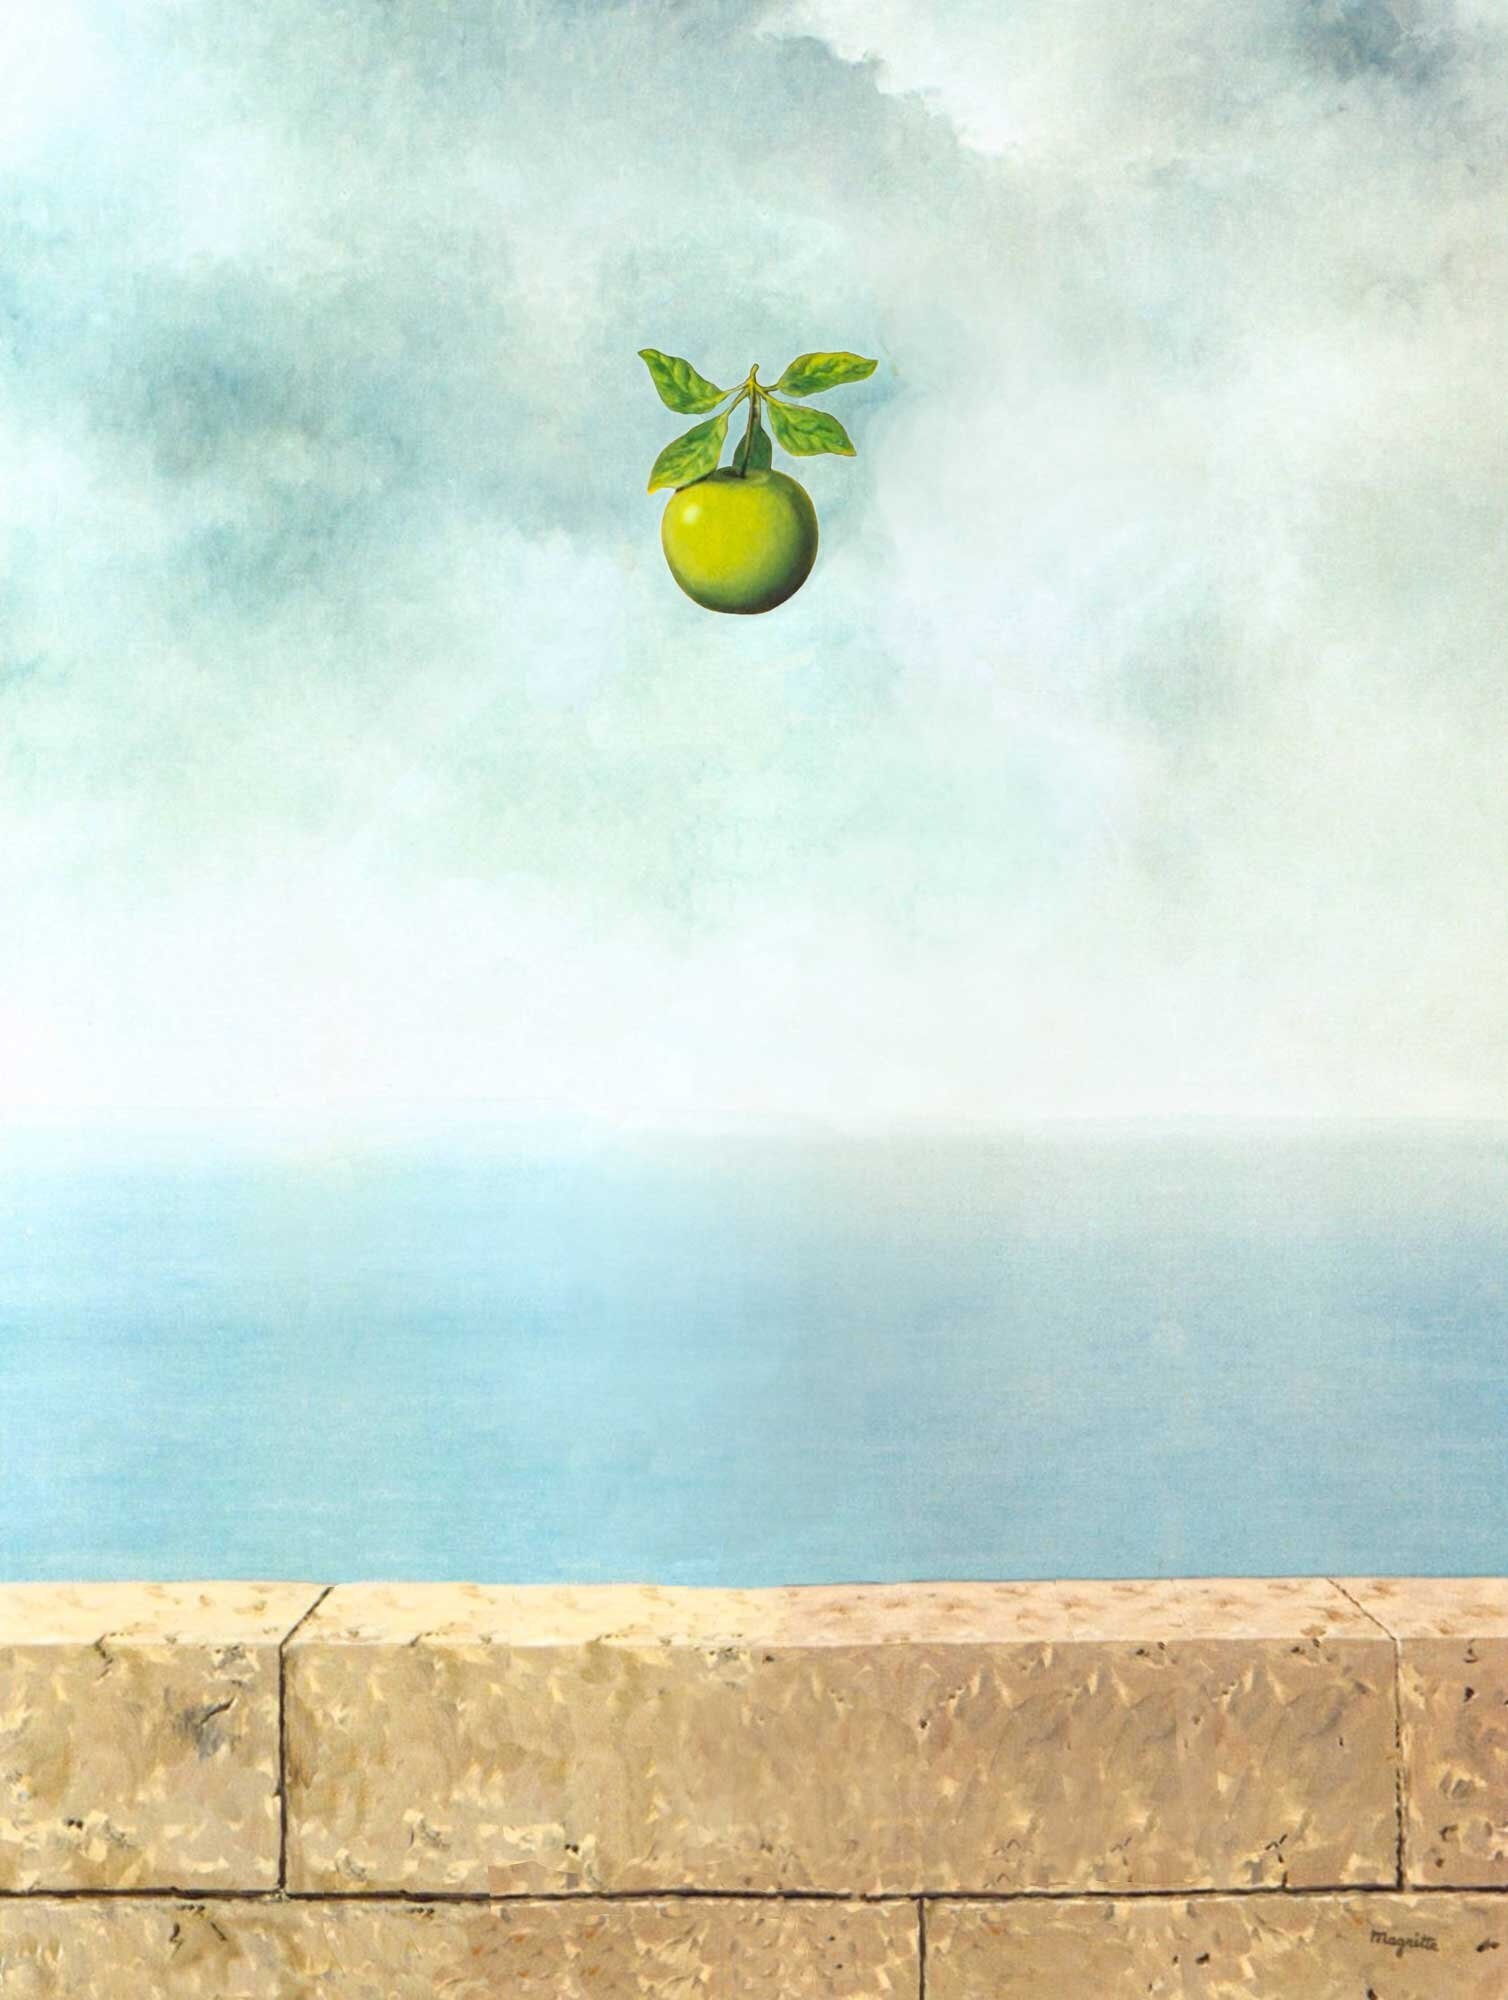 The Apple by Ren Magritte, Symbolic representation, Surrealistic painting, Thought-provoking imagery, 1510x2000 HD Handy